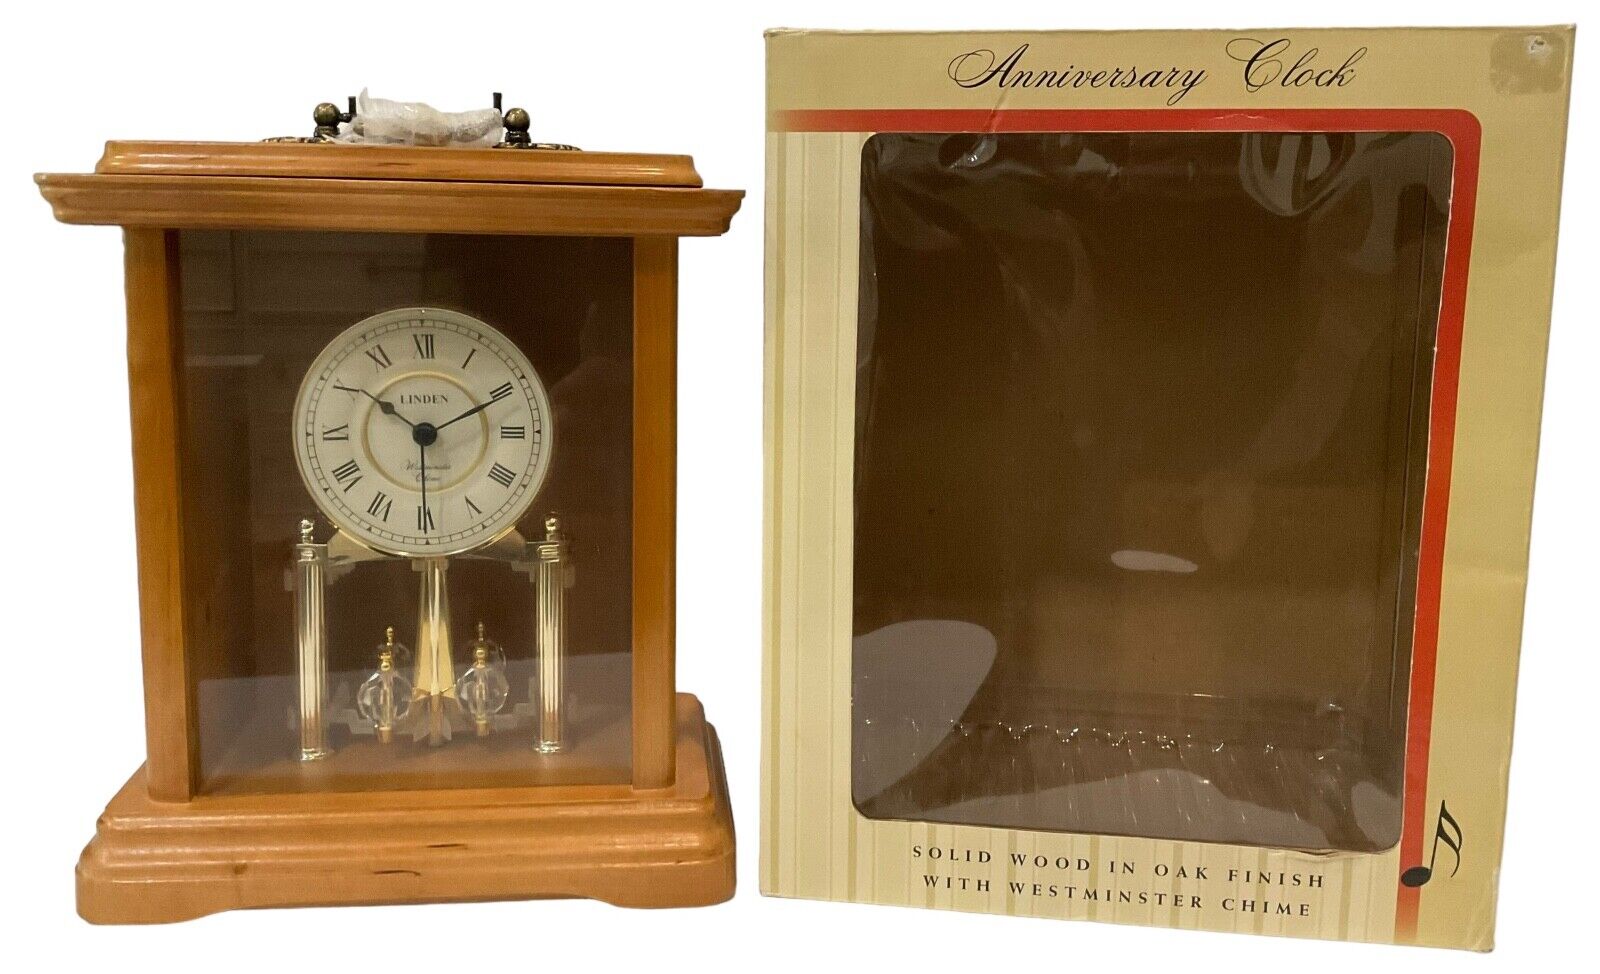 Linden Quartz anniversary clock. Solid wood with Westminster chime. Battery.